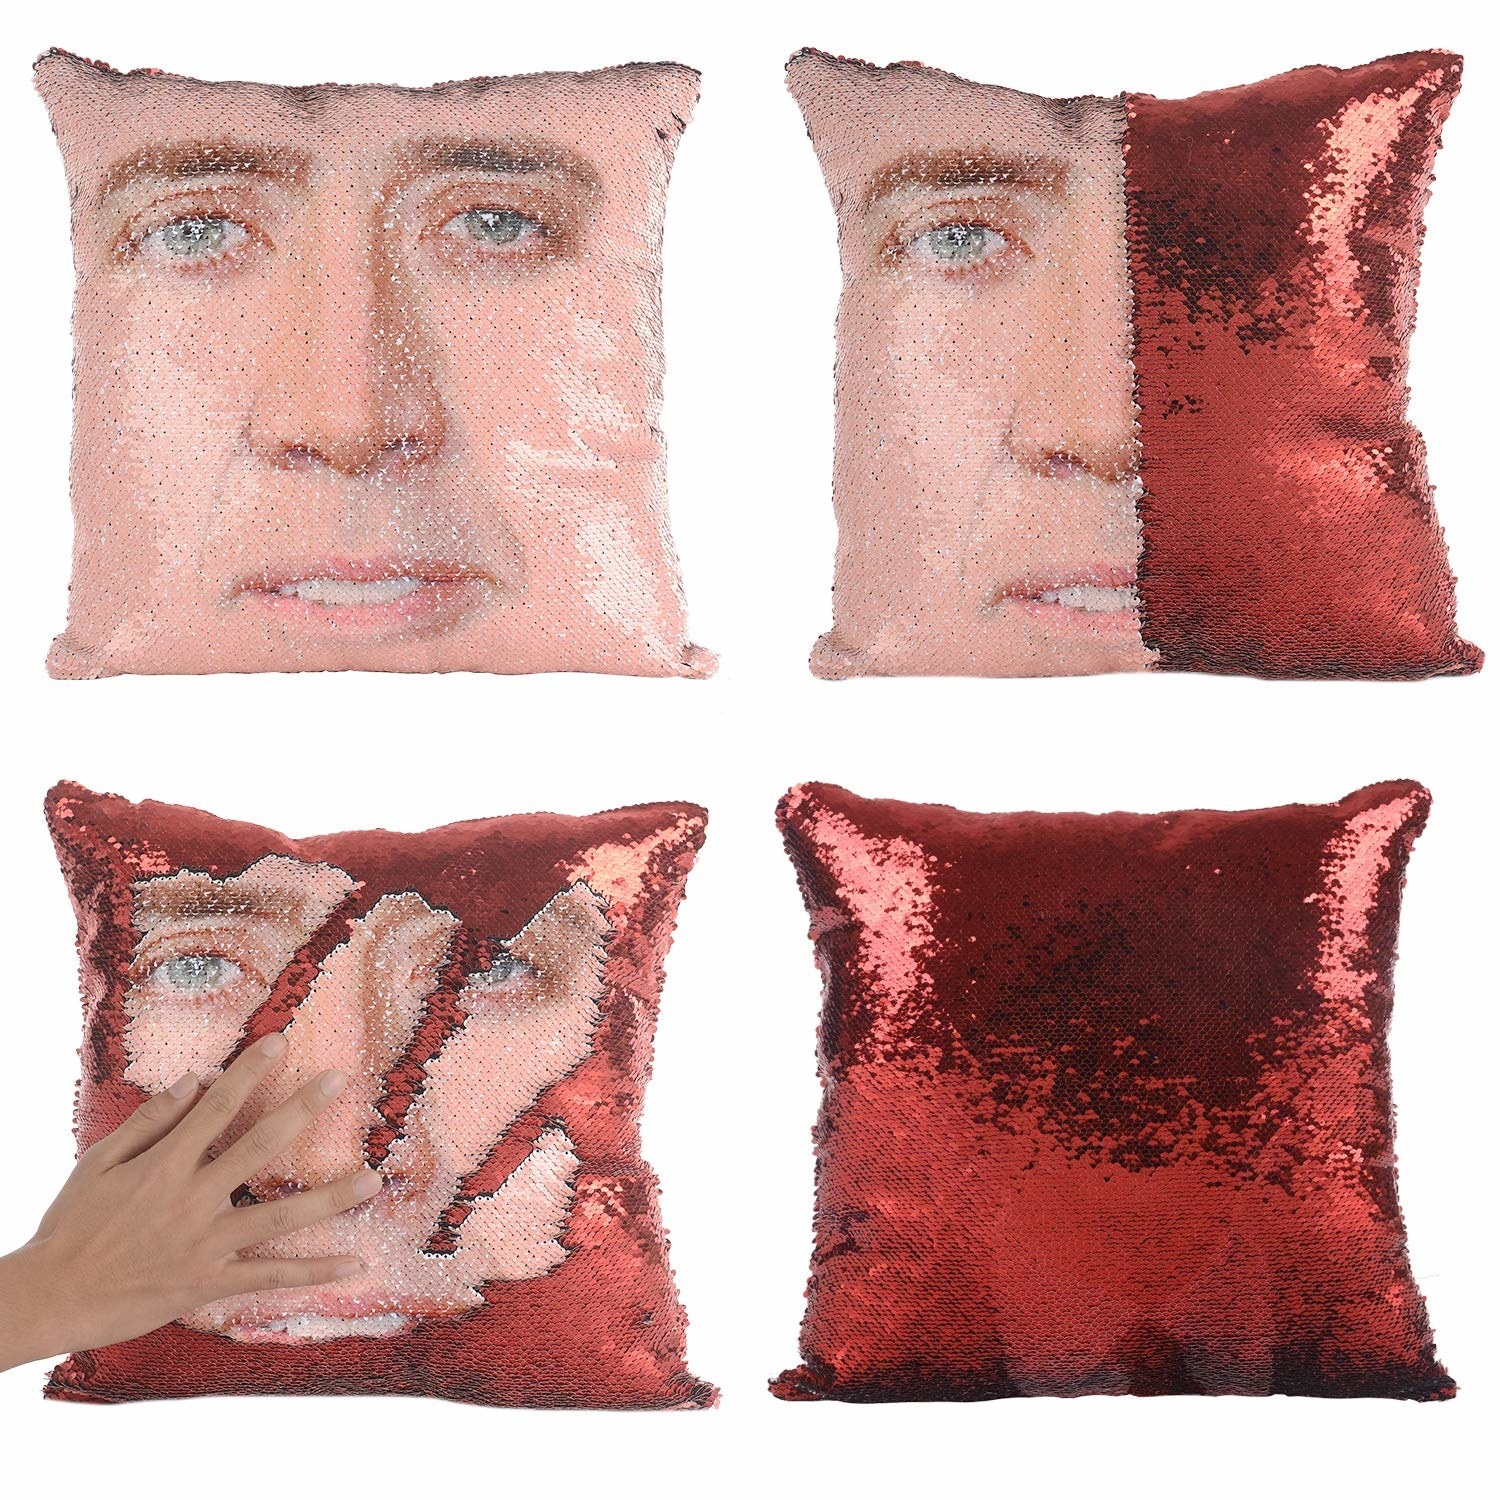 The throw pillow cover, featuring all-over sequins that are a solid color on one side which can be brushed to reveal a Nic Cage face